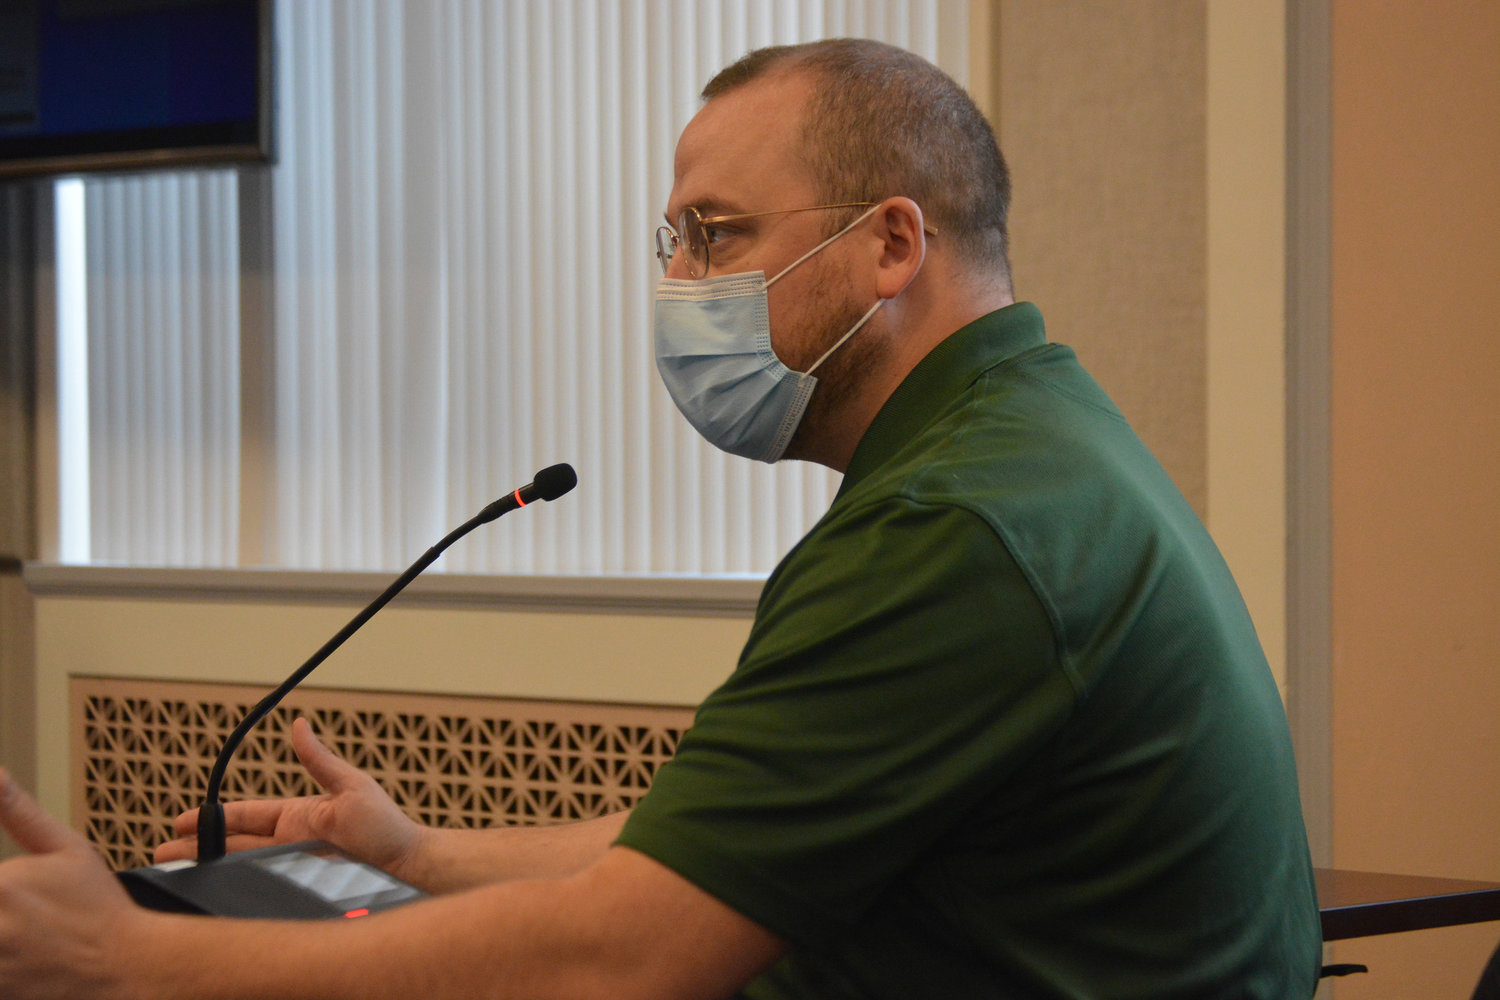 FILE PHOTO — Public Health Director J.P. Anderson announces new policies in how the county will publicly report COVID-19 cases.